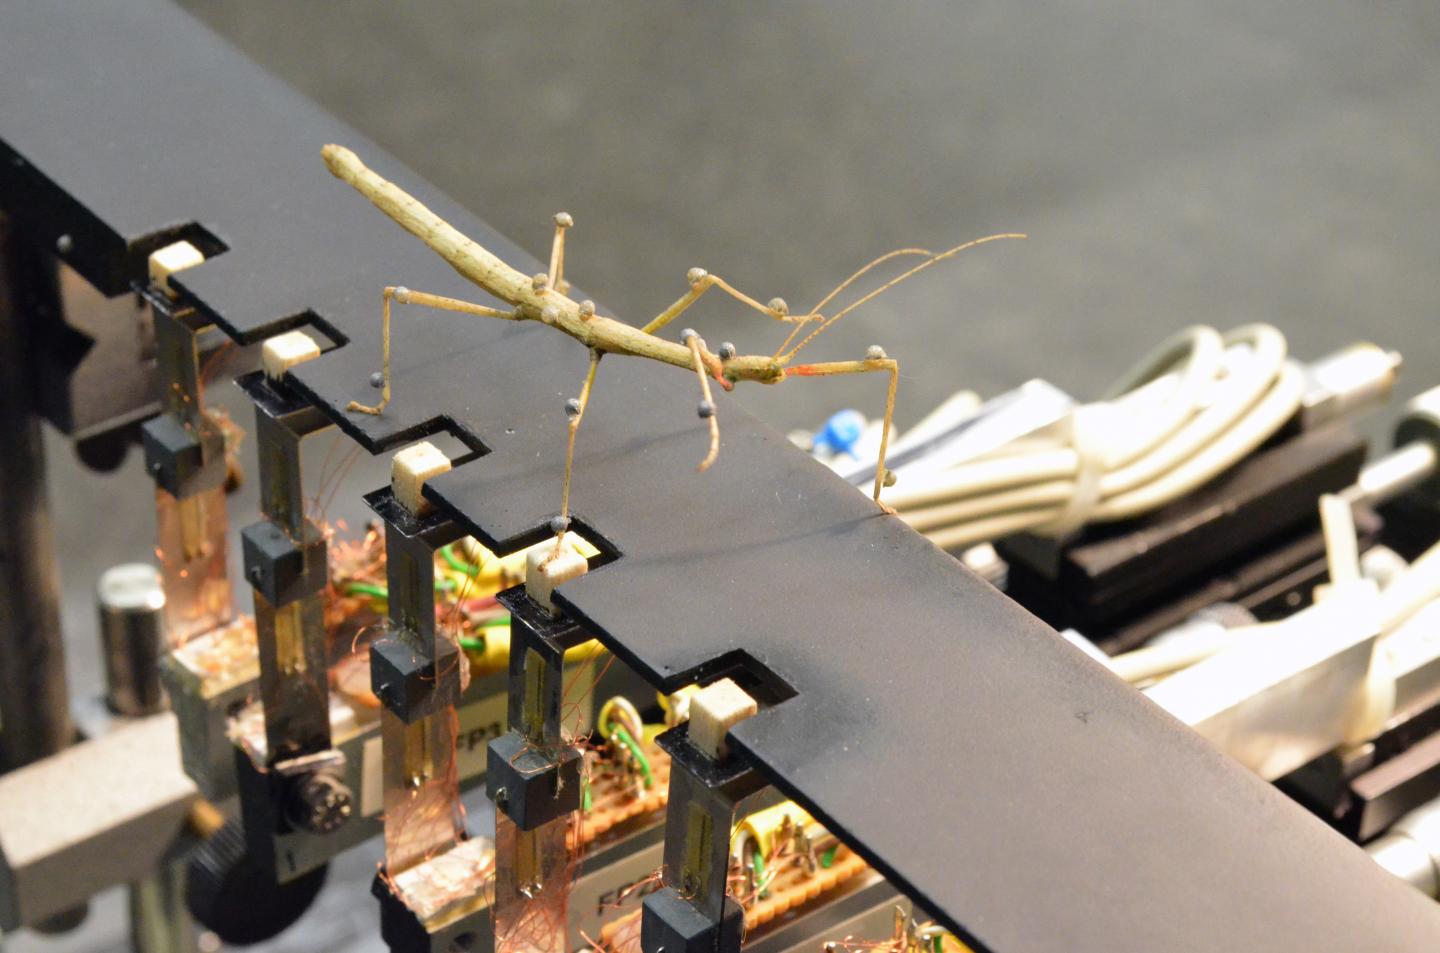 Which Forces Do the Legs of a Stick Insect Exert, and How Does the Insect Move?